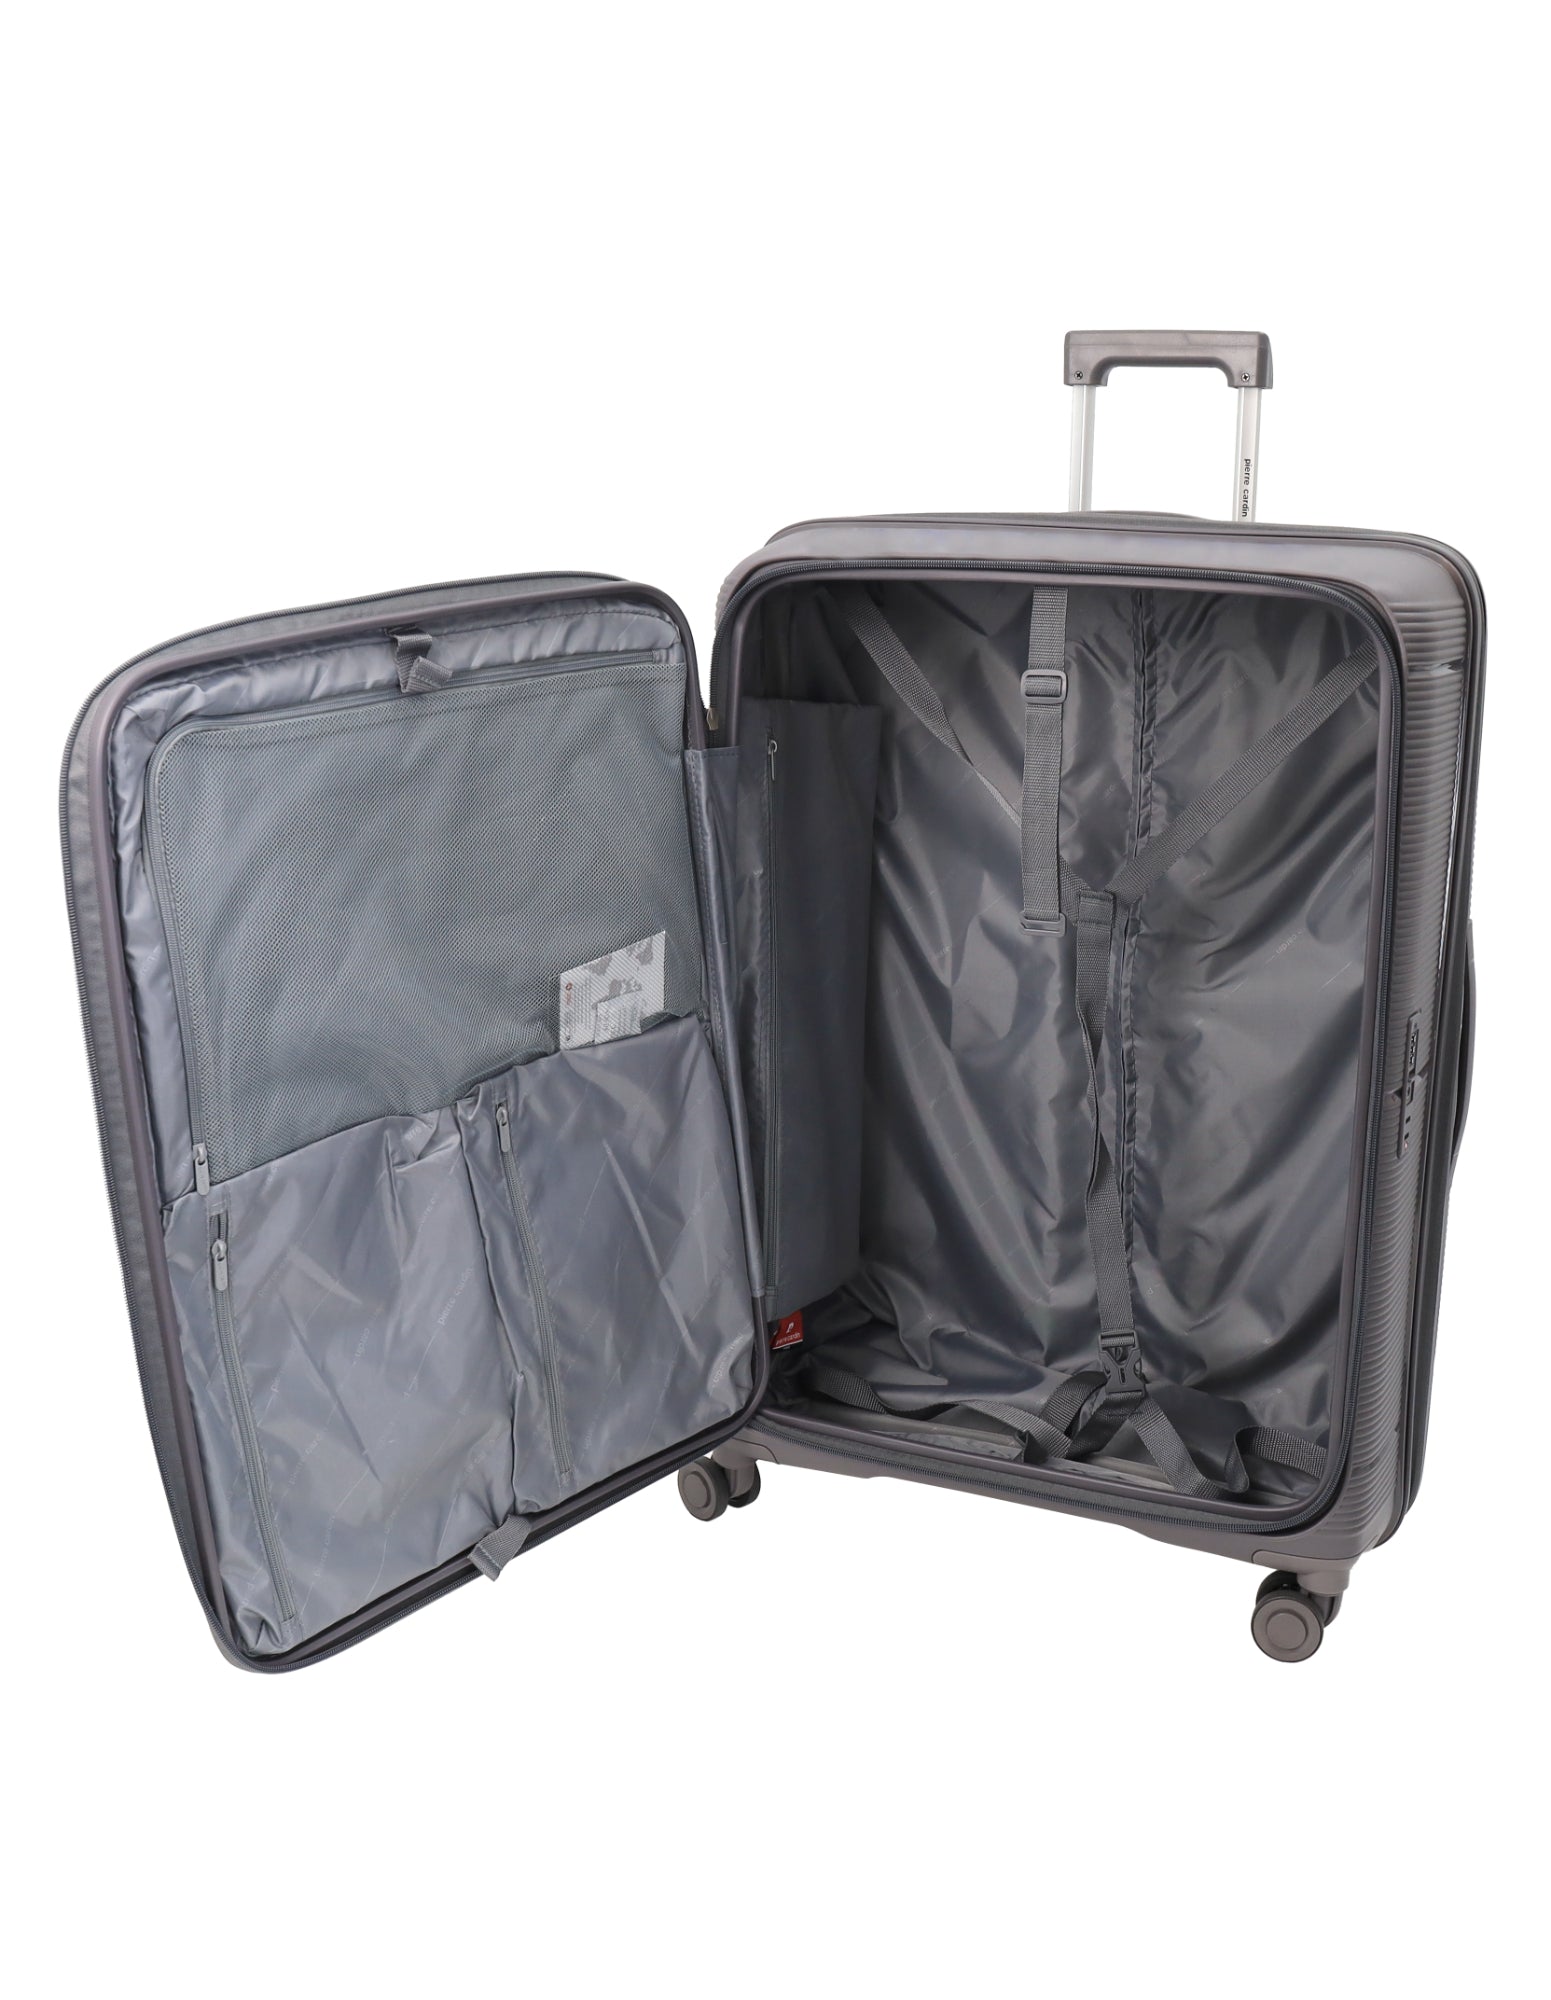 Pierre Cardin 80cm LARGE Hard Shell Suitcase in Graphite